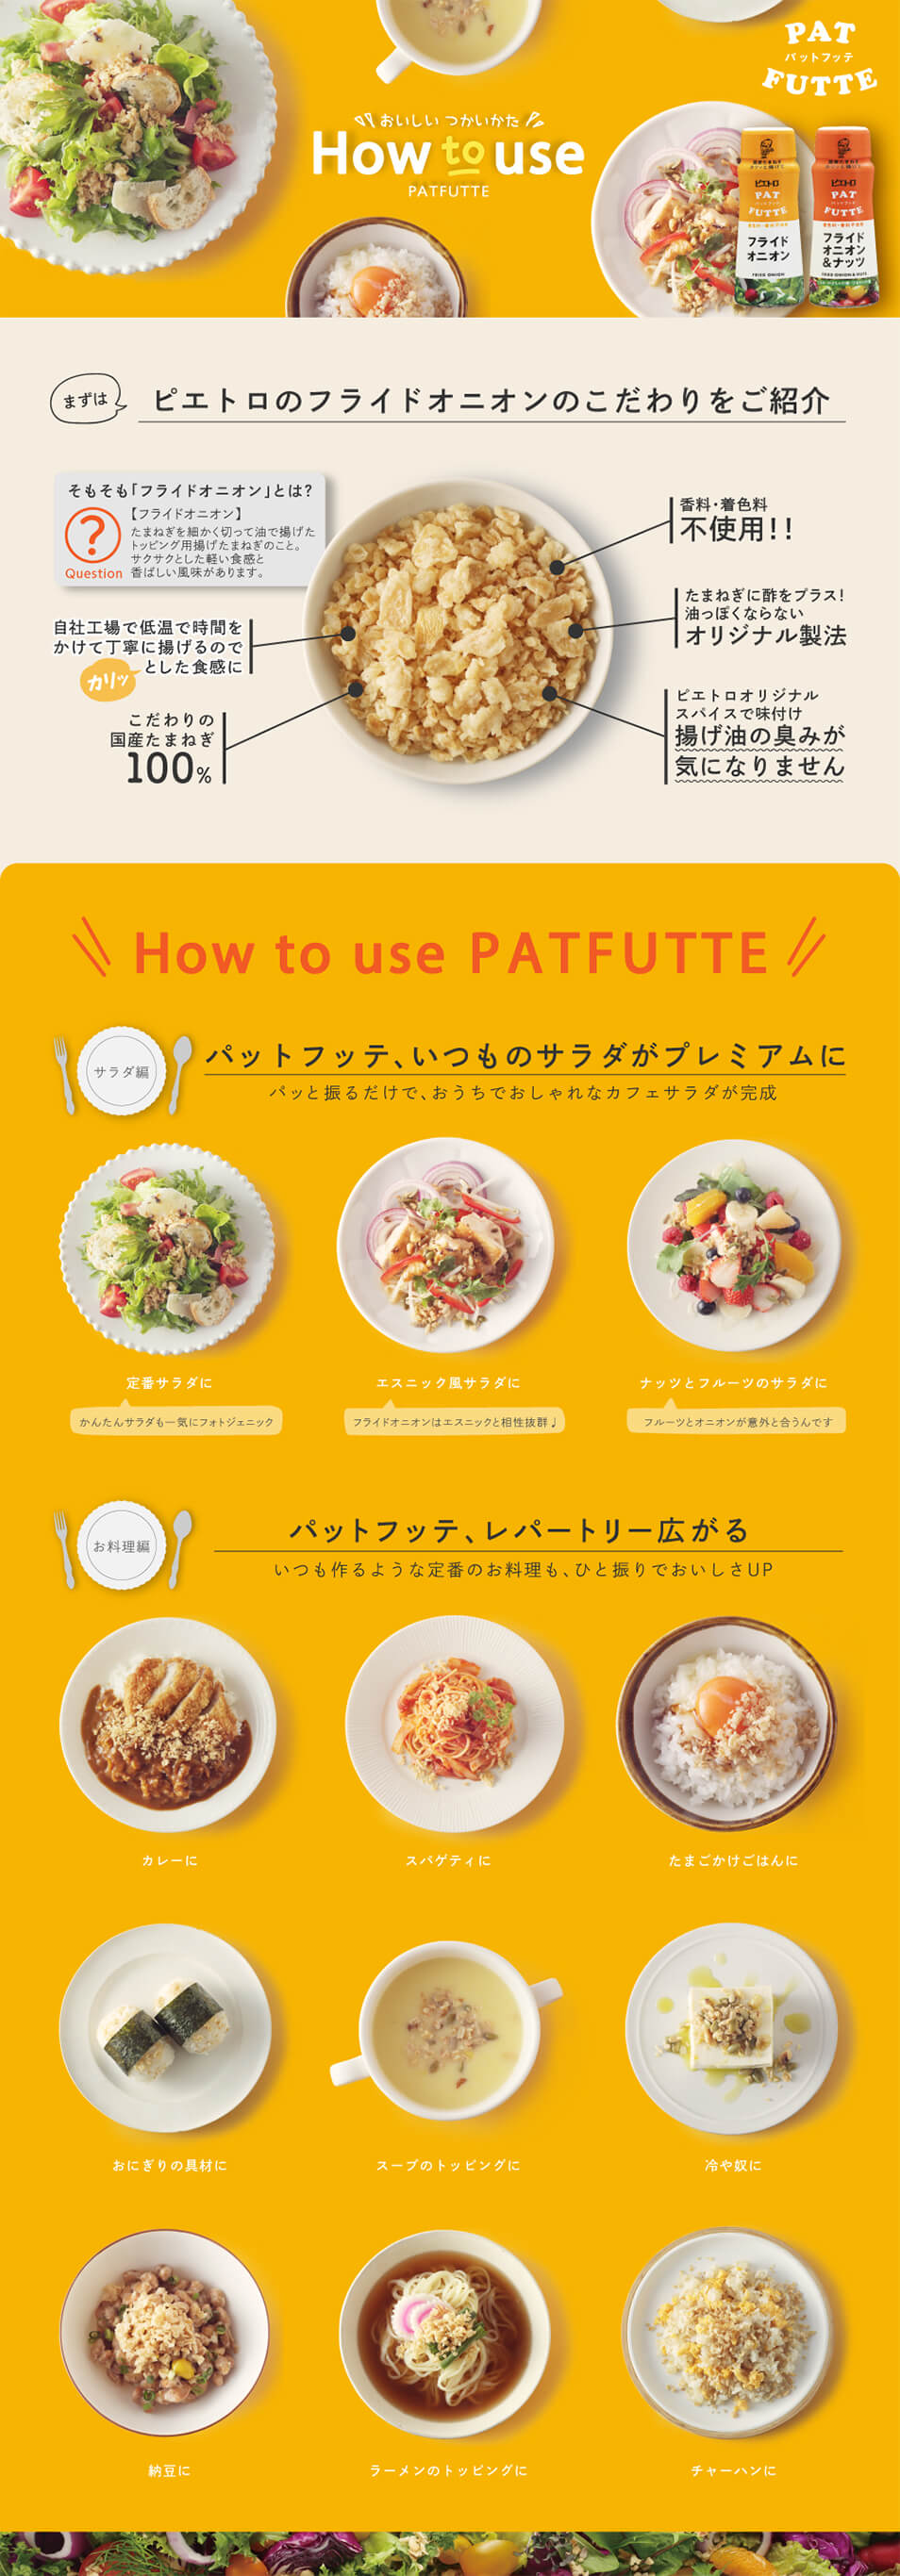 How to use PATFUTTE_pc_1